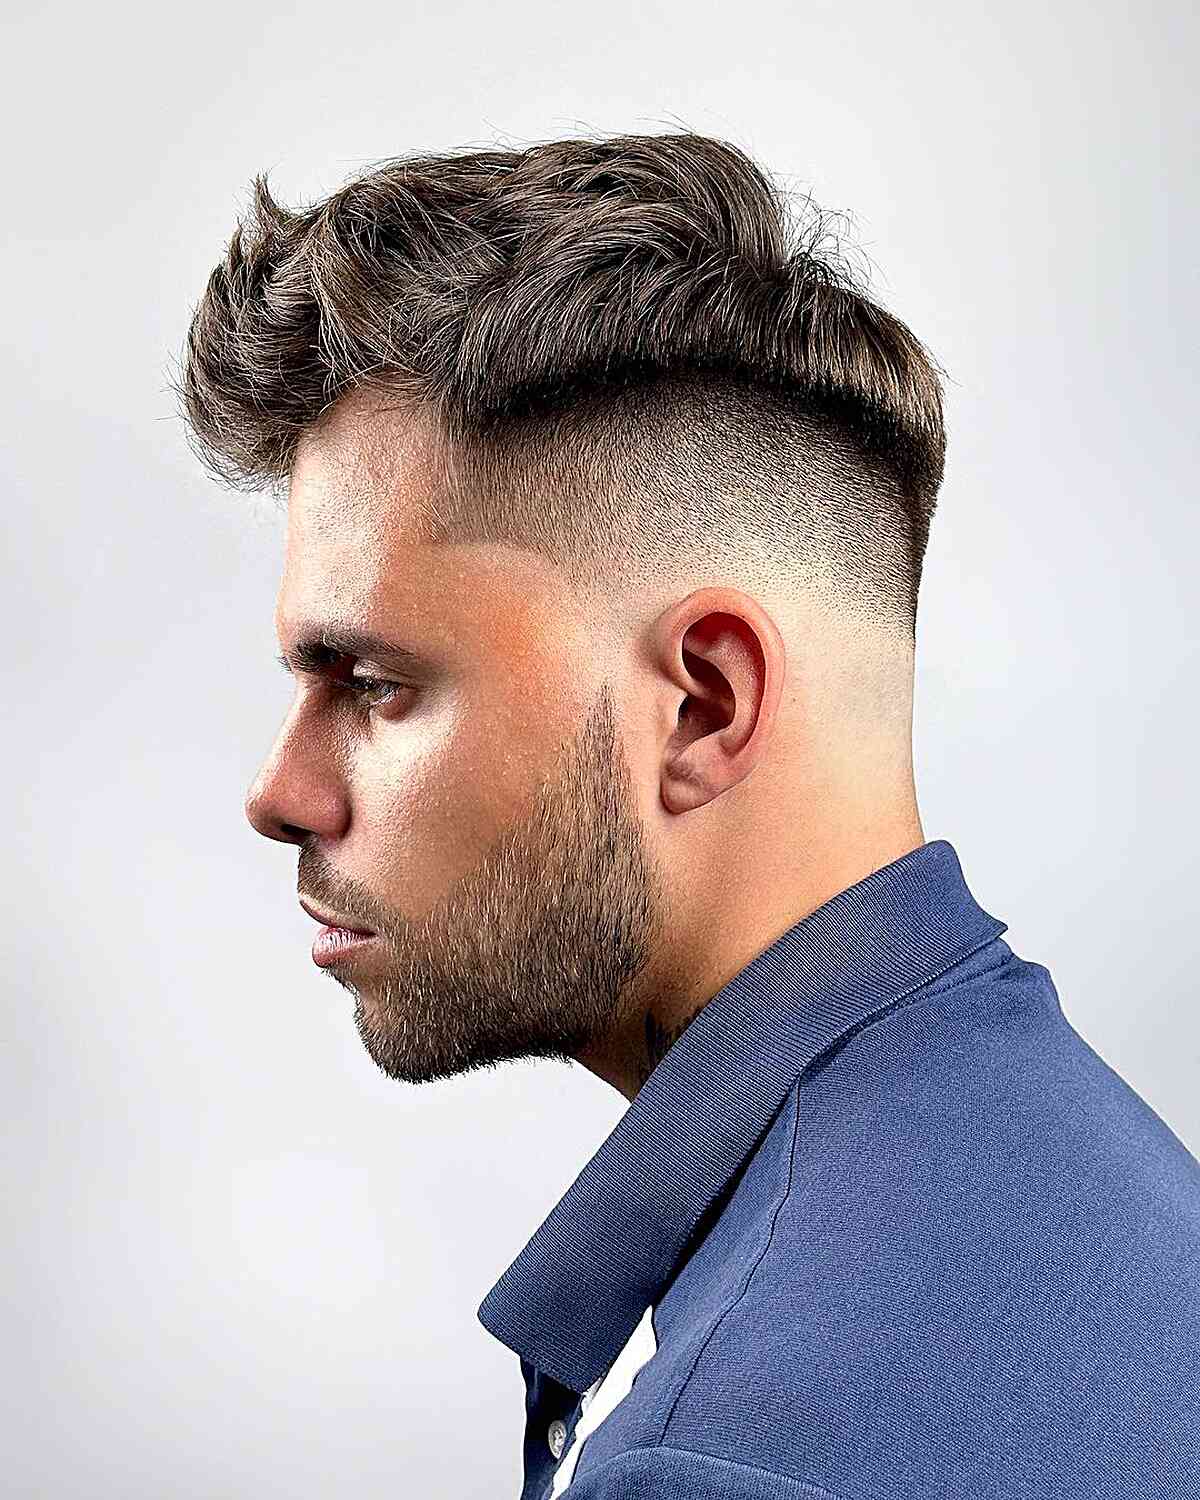 Discover 160+ men’s simple casual hairstyle best